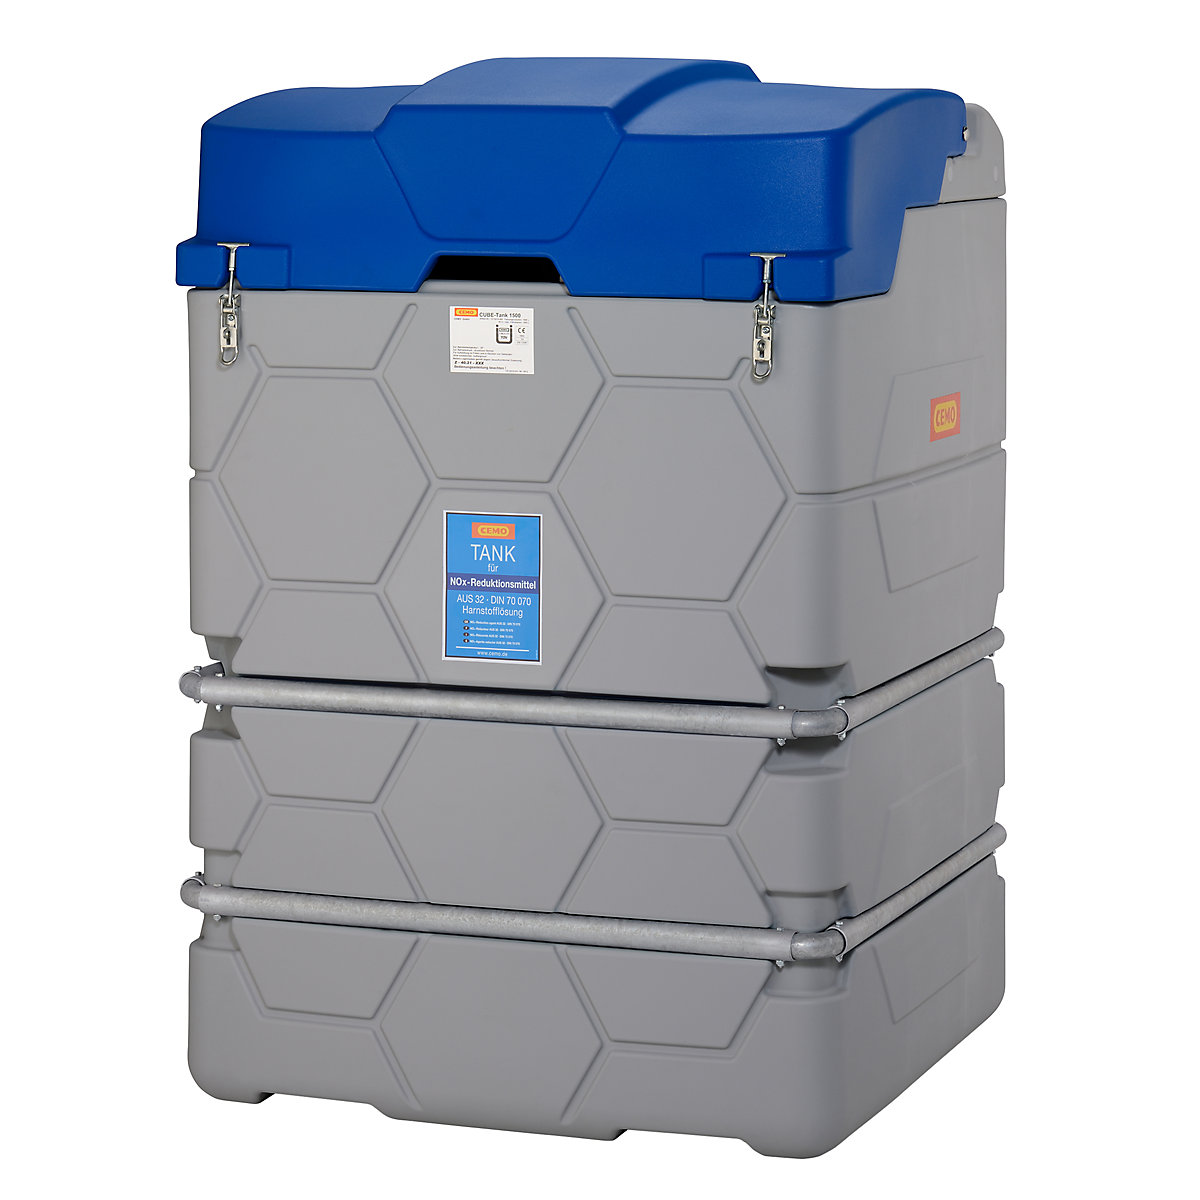 CUBE tank for AUS 32 (AdBlue®) - CEMO